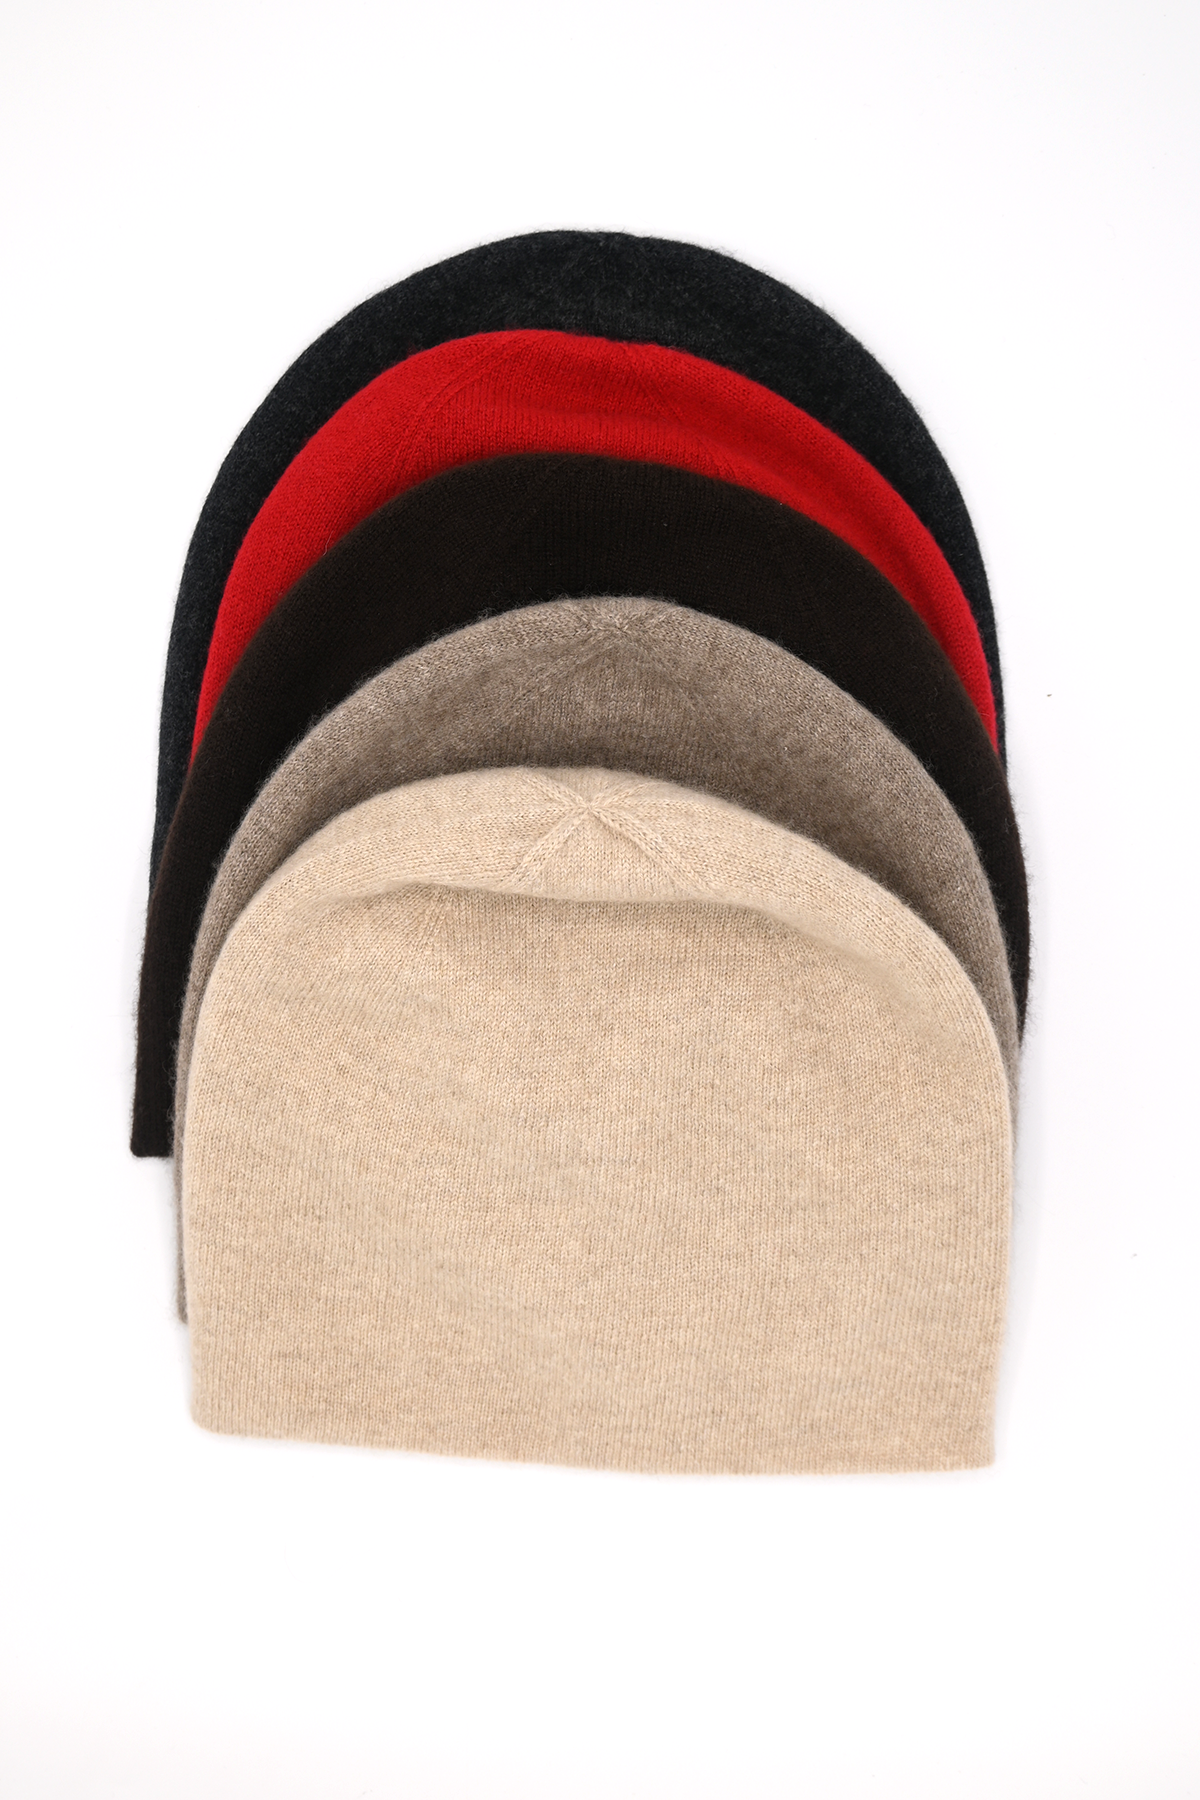 Cashmere Slouch Beanie